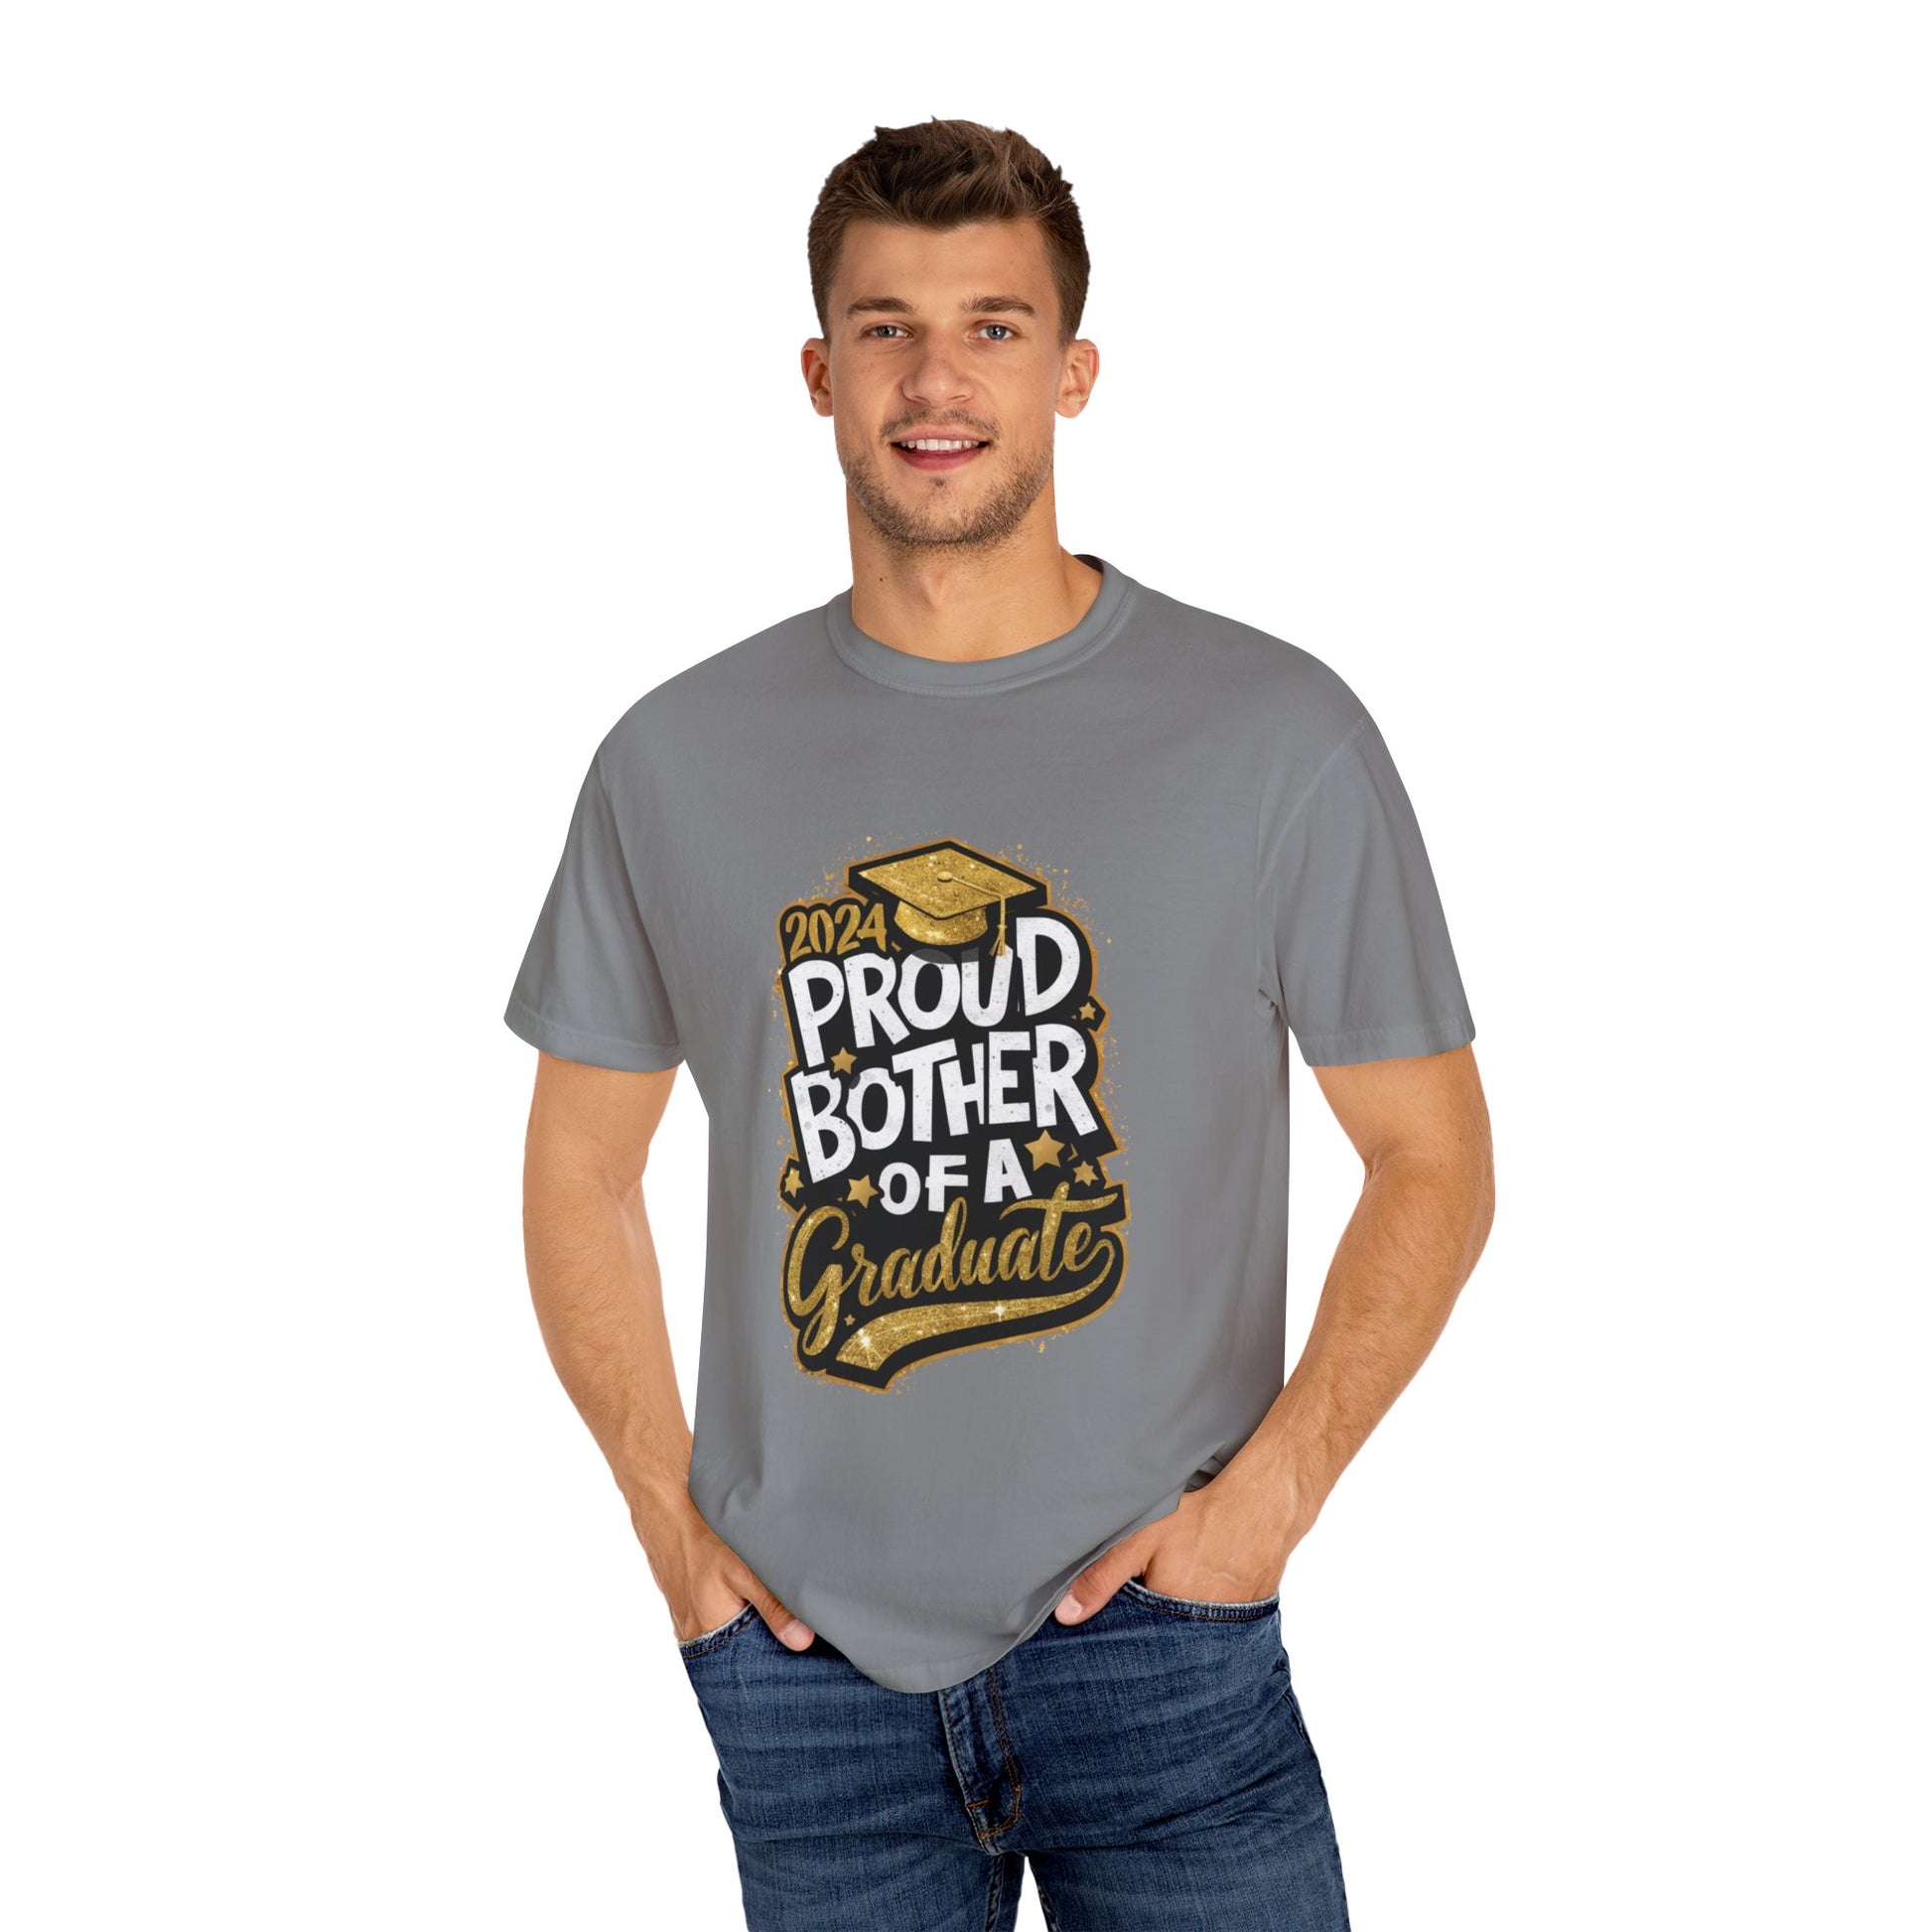 Proud Brother of a 2024 Graduate Unisex Garment-dyed T-shirt Cotton Funny Humorous Graphic Soft Premium Unisex Men Women Grey T-shirt Birthday Gift-42